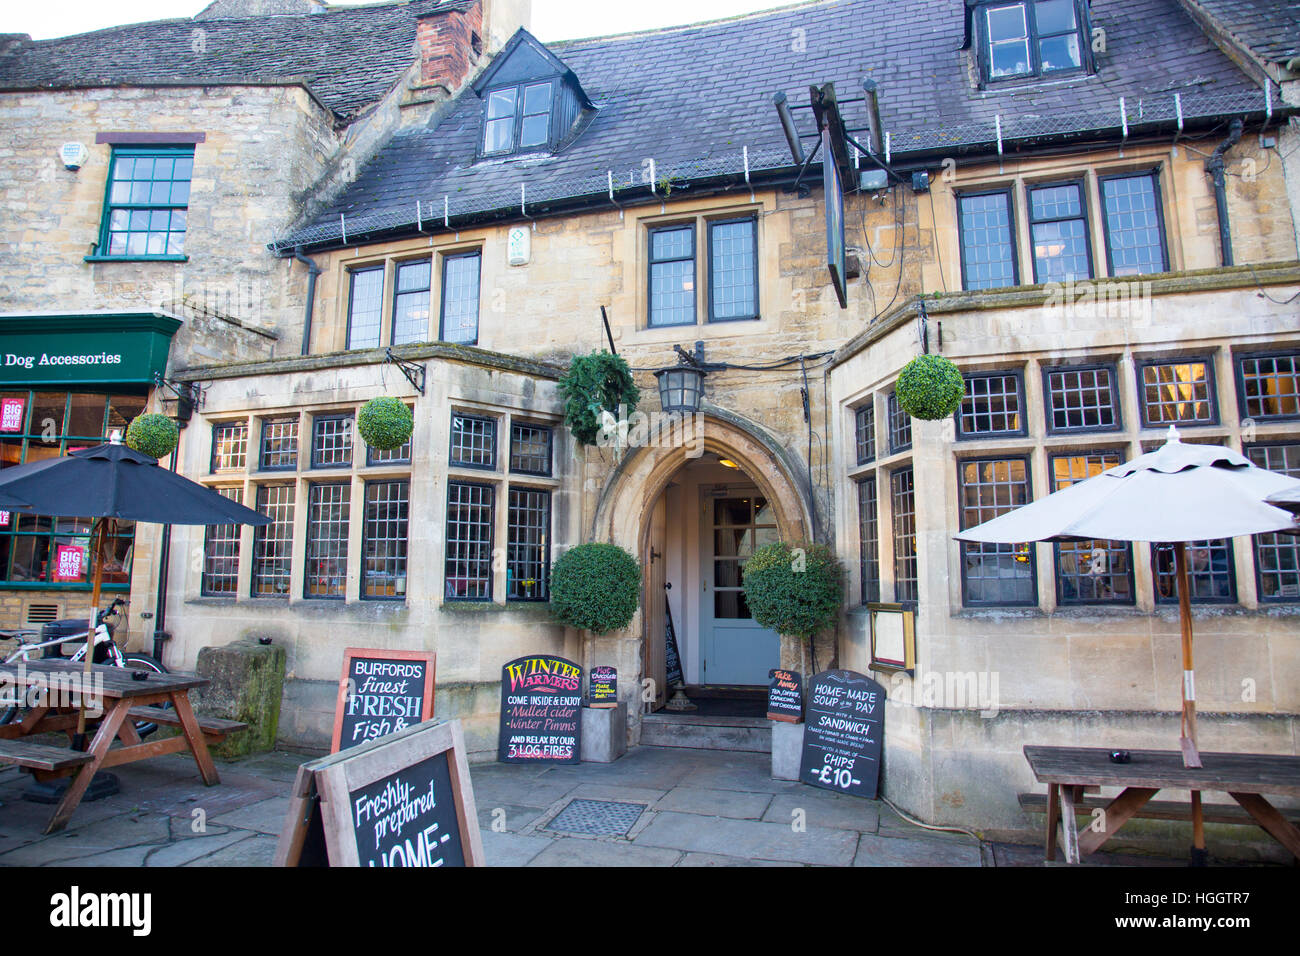 Traditional english pub built of local stone in the cotswolds village of Burford, Oxfordshire,England Stock Photo